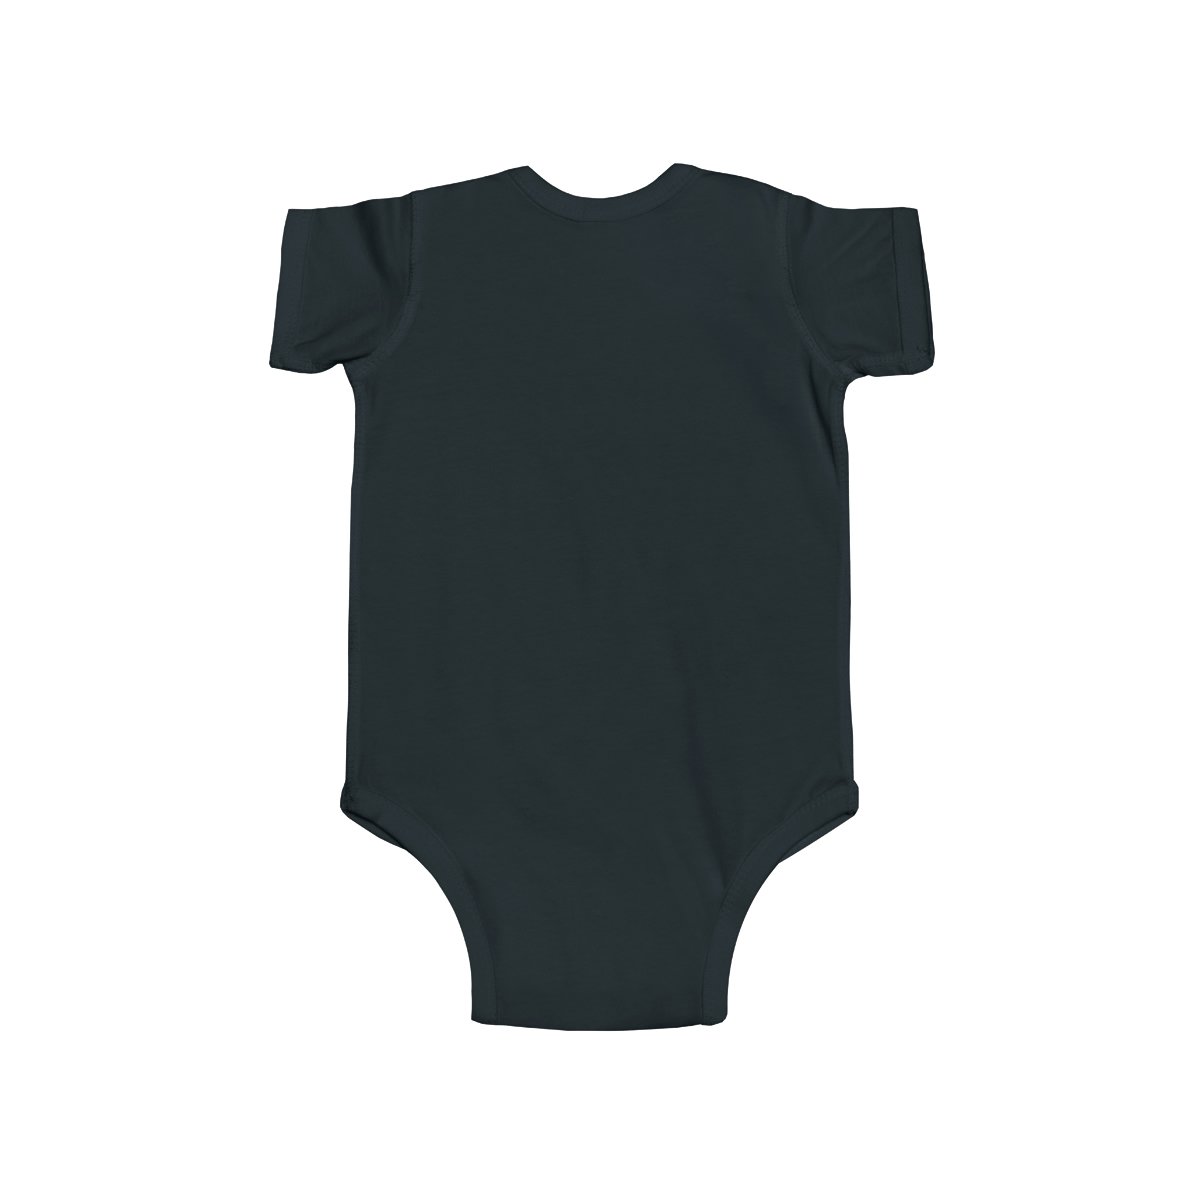 Sanctuary International – Don’t Stop Thinking About Tomorrow Infant Fine Jersey Bodysuit